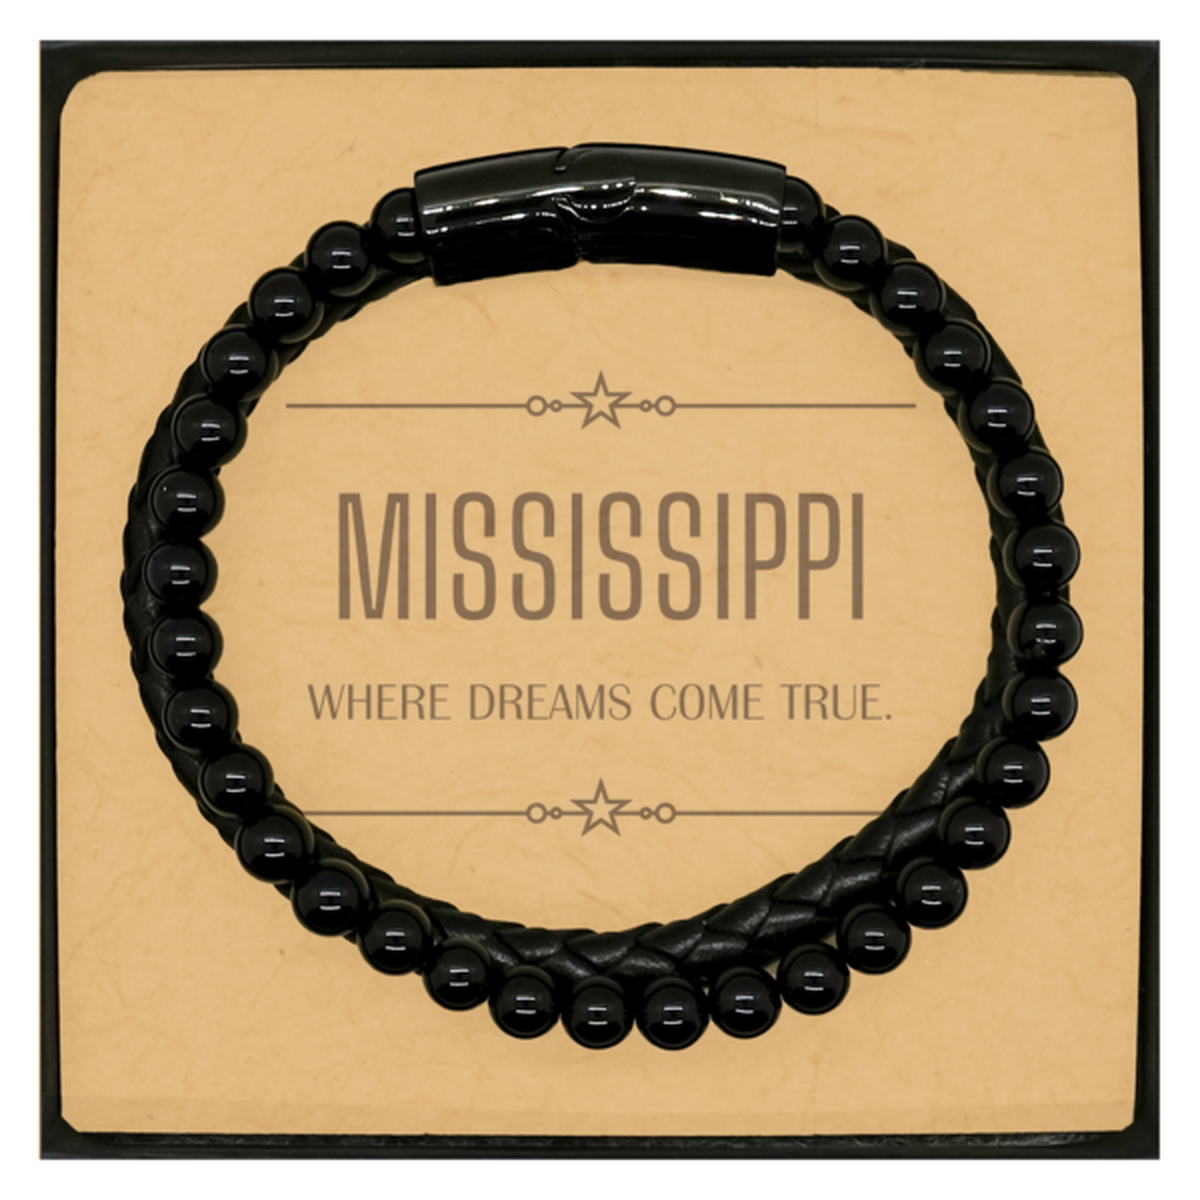 Love Mississippi State Stone Leather Bracelets, Mississippi Where dreams come true, Birthday Christmas Inspirational Gifts For Mississippi Men, Women, Friends